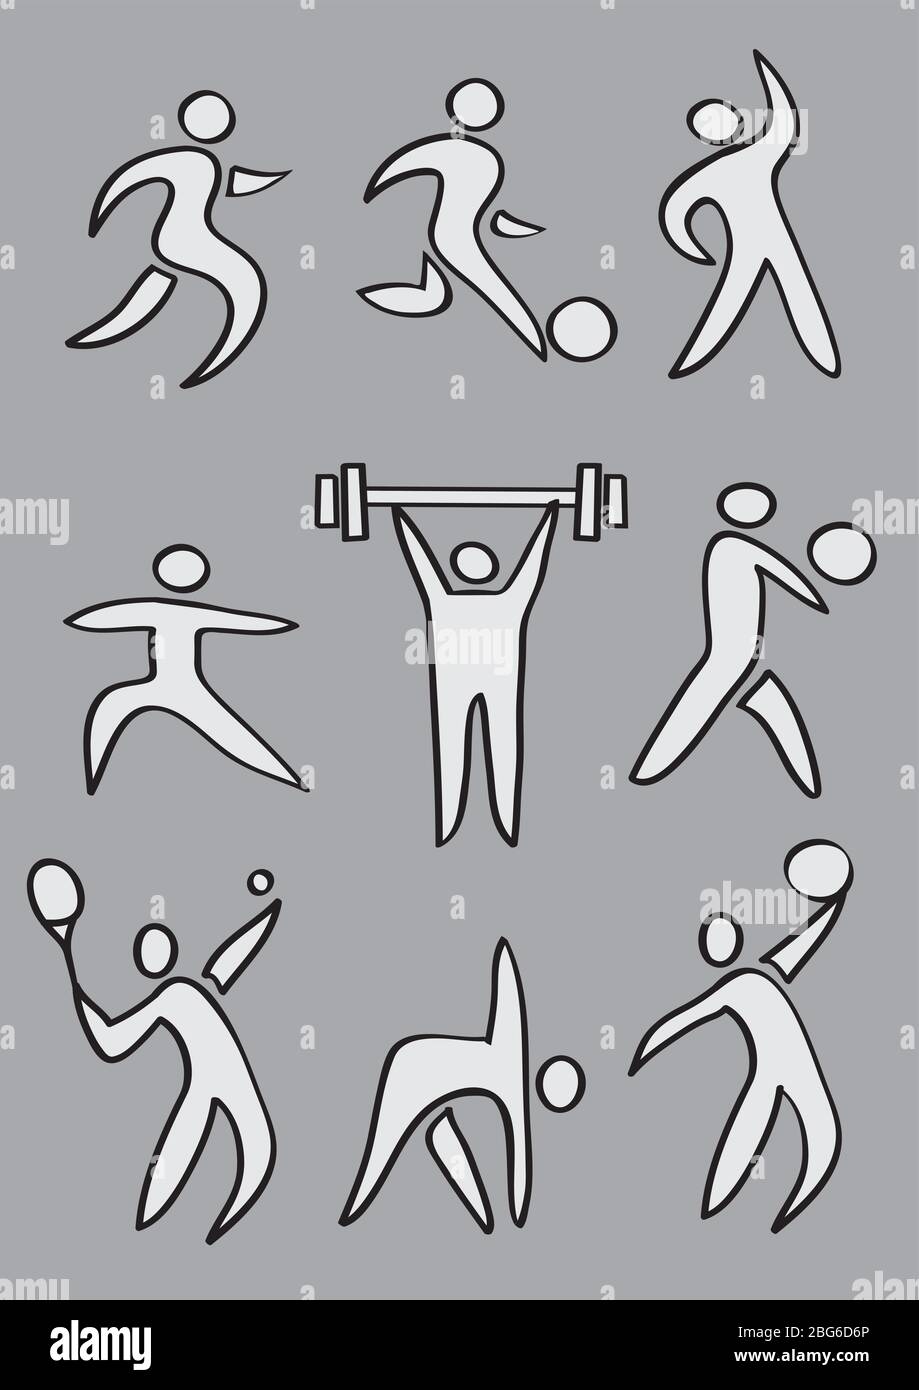 Collection of simple vector illustration of sports icons in ...